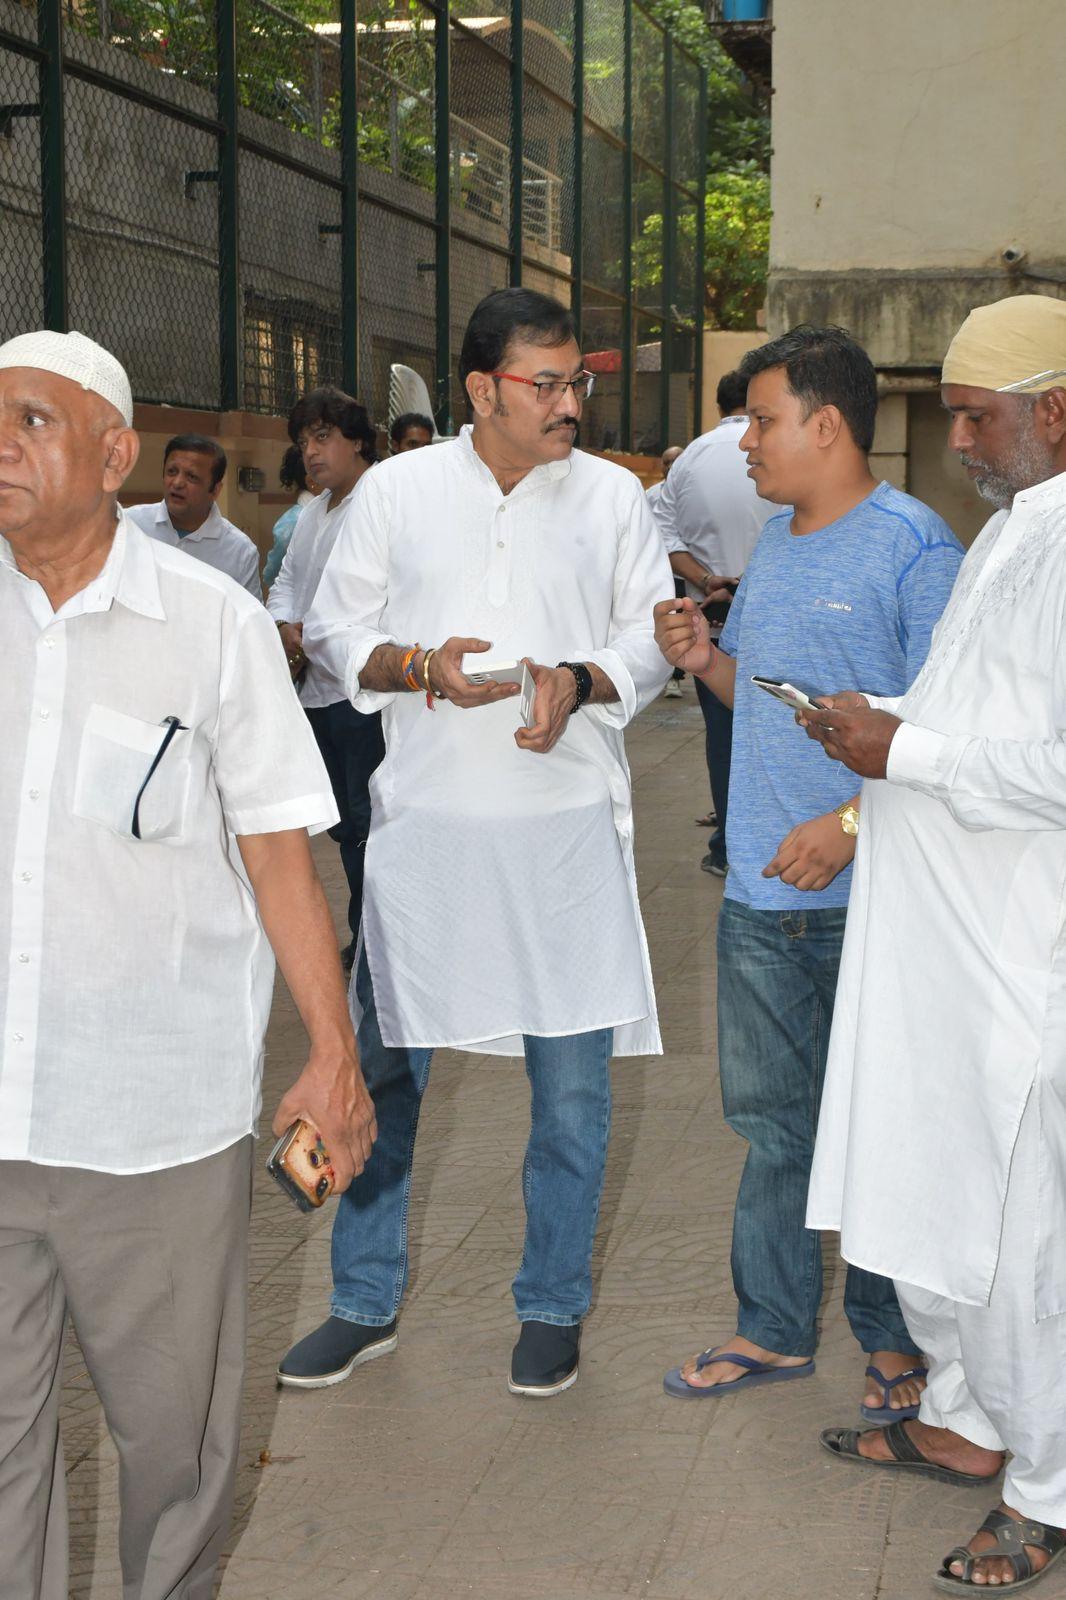 Sudesh Bhosle attended the funeral to grieve with his fellow colleagues